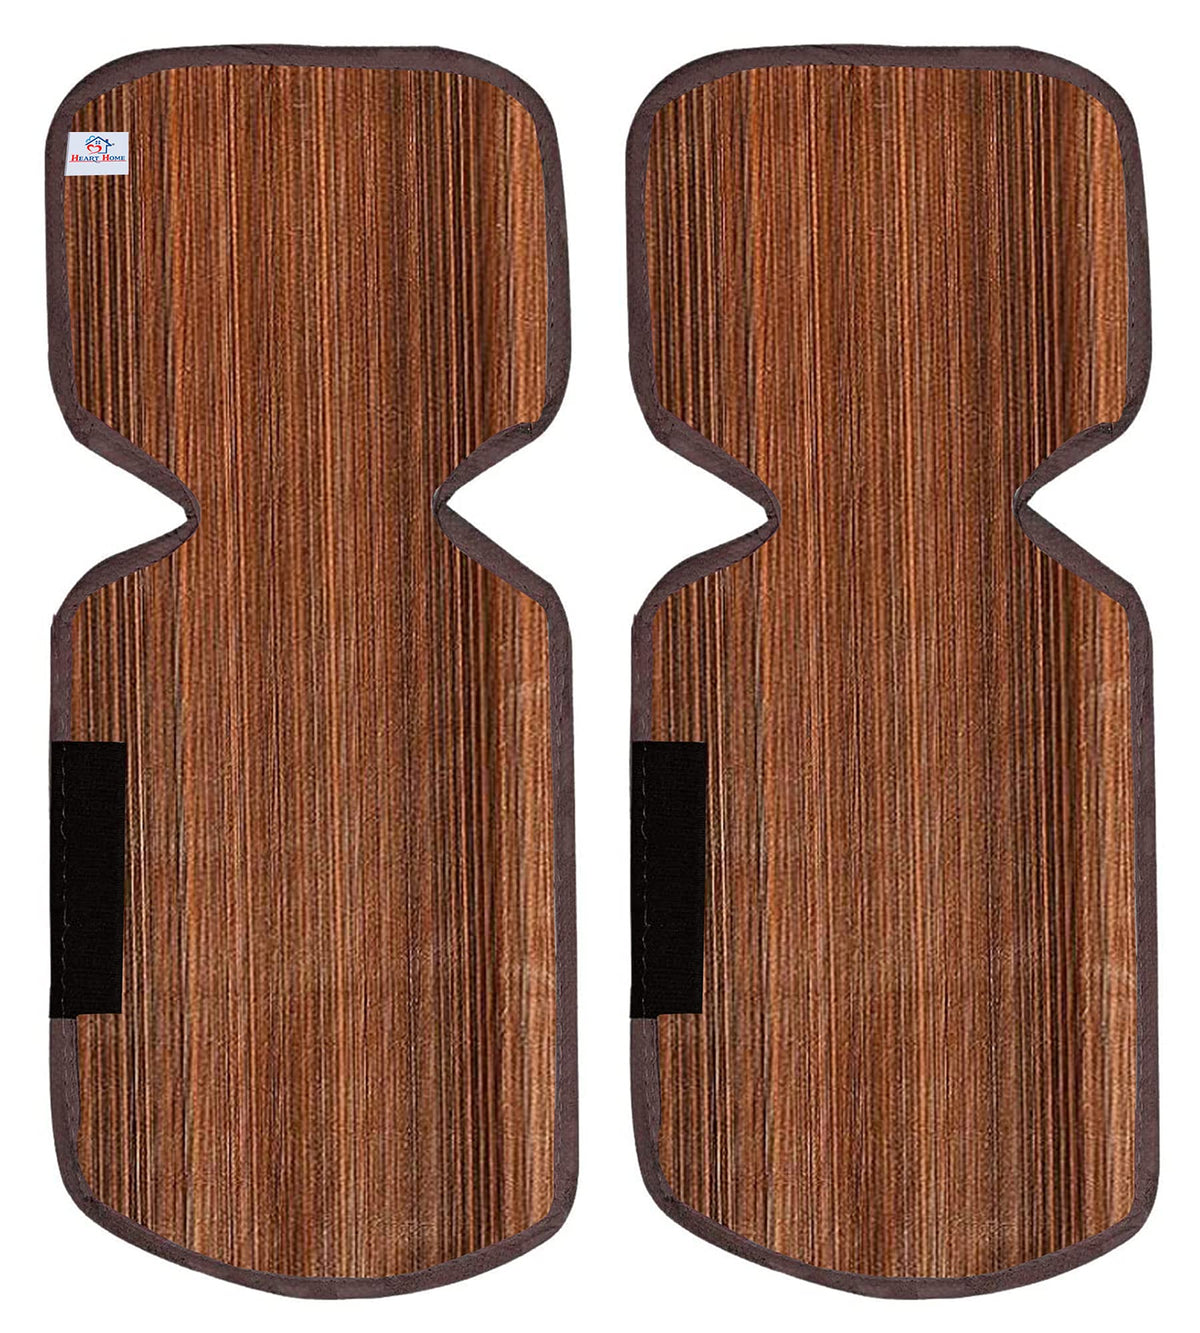 Heart Home Refrigerator Door Handle Covers- Keeps Kitchen Appliance Clean from Smudges, Fingertips, Drips, Food Stains, Perfect for Dishwashers- Lining, Brown, Standard, Set of 2 (HS_37_HEARTH020148)